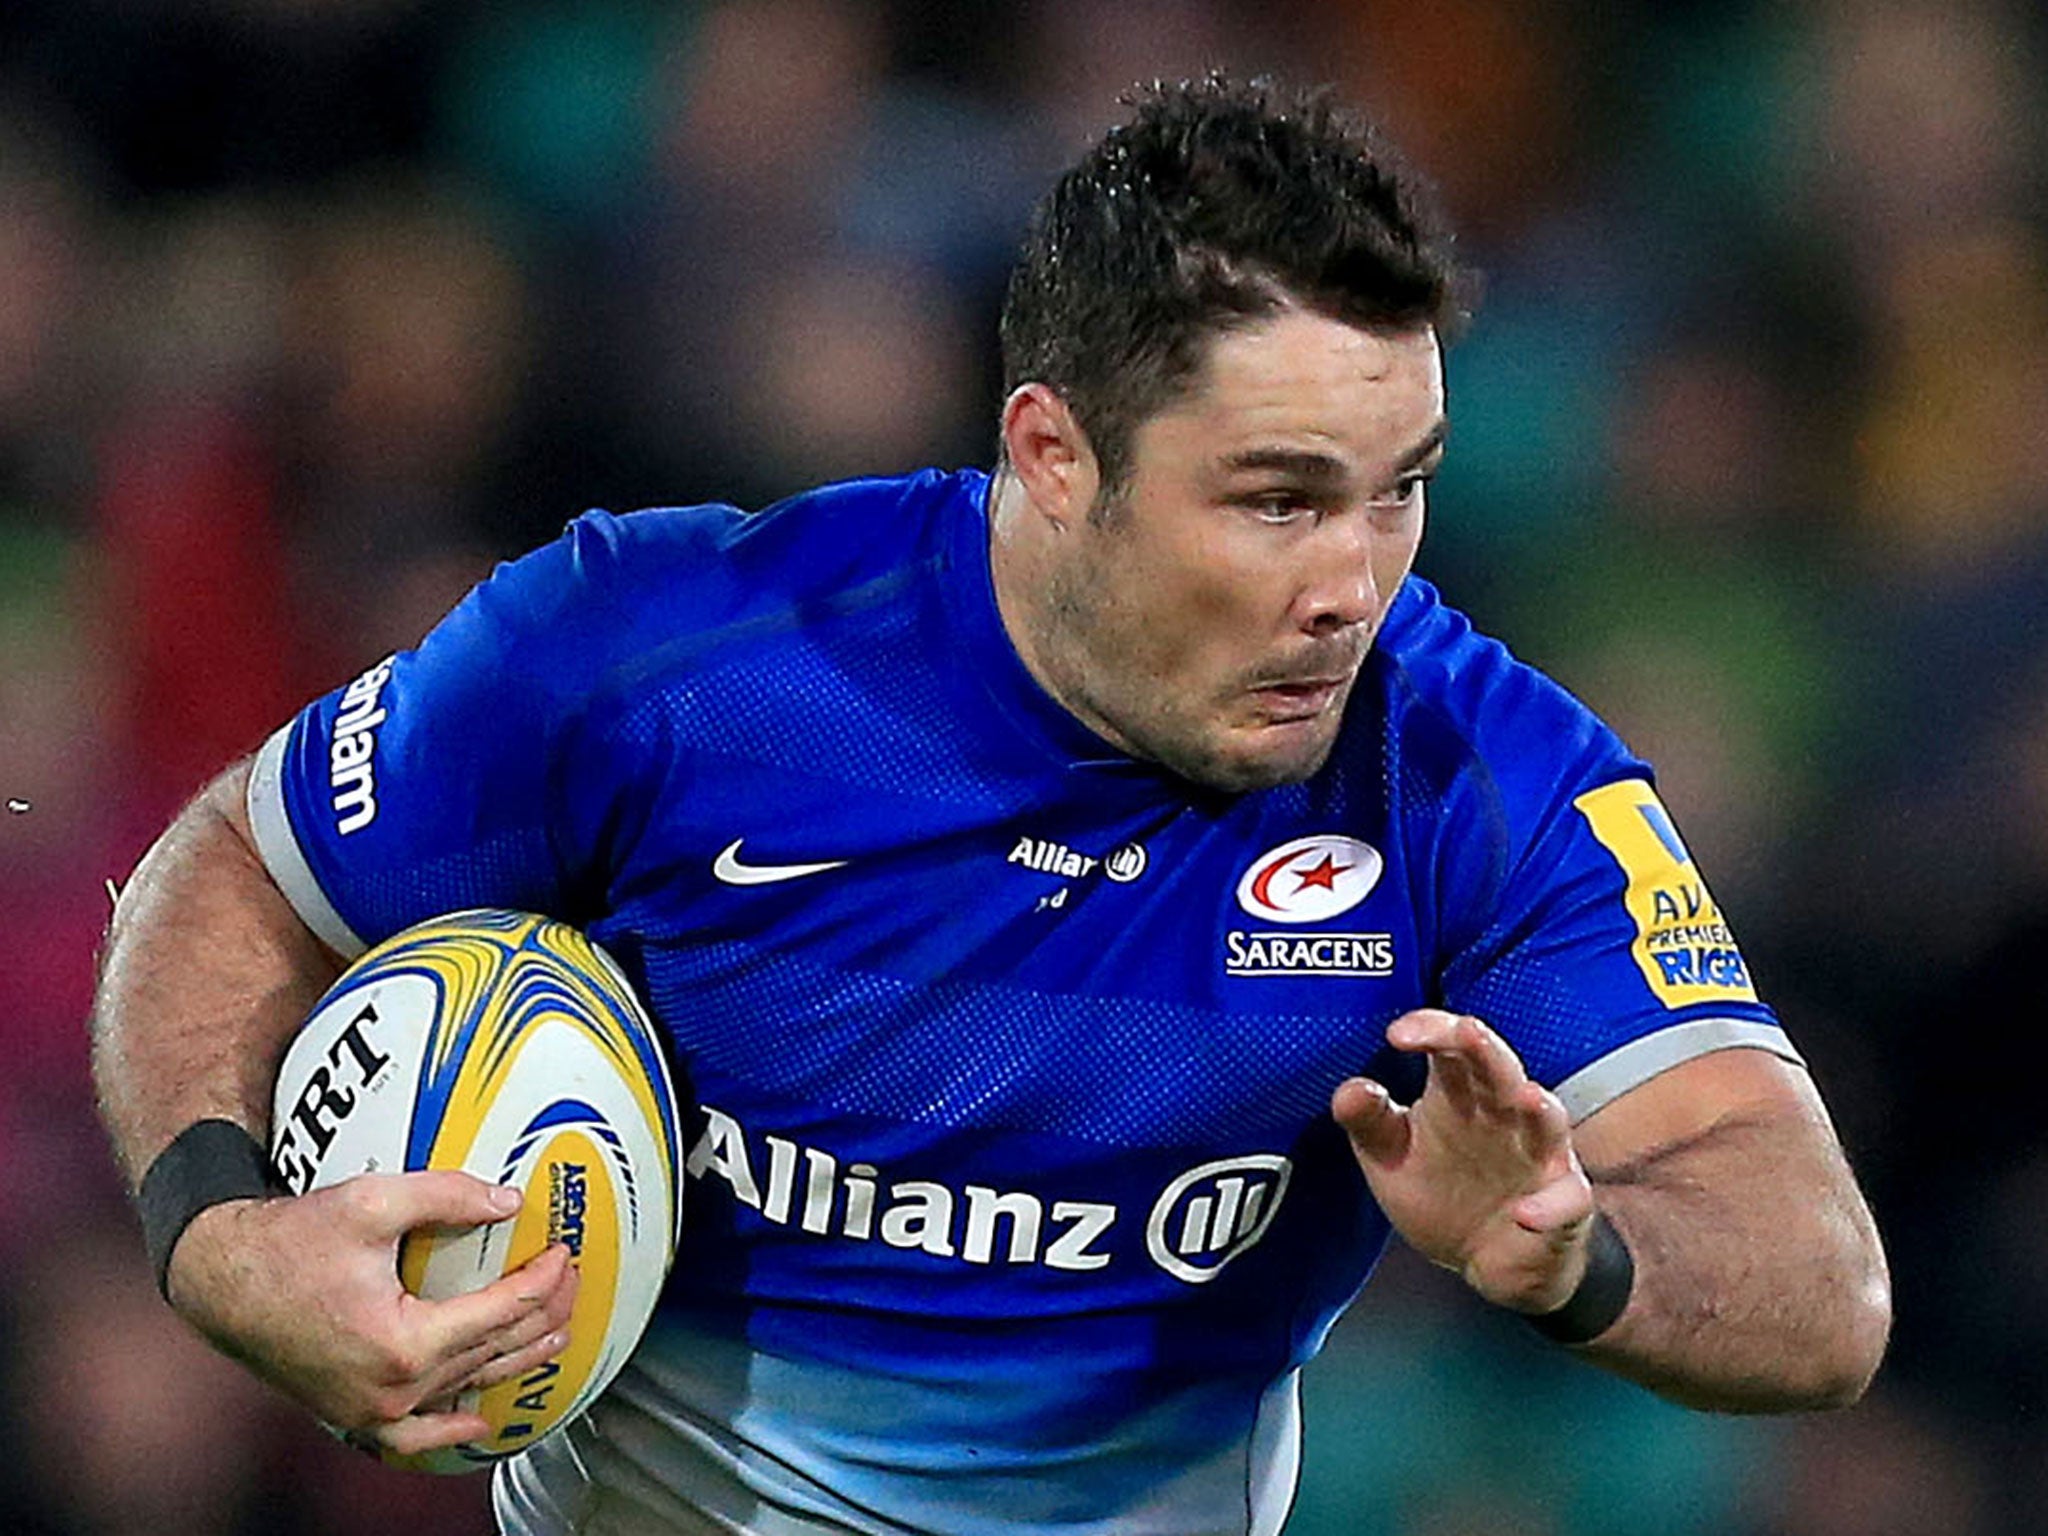 Brad Barritt in action for Saracens, whose 12-6 win kept them top of the Premiership